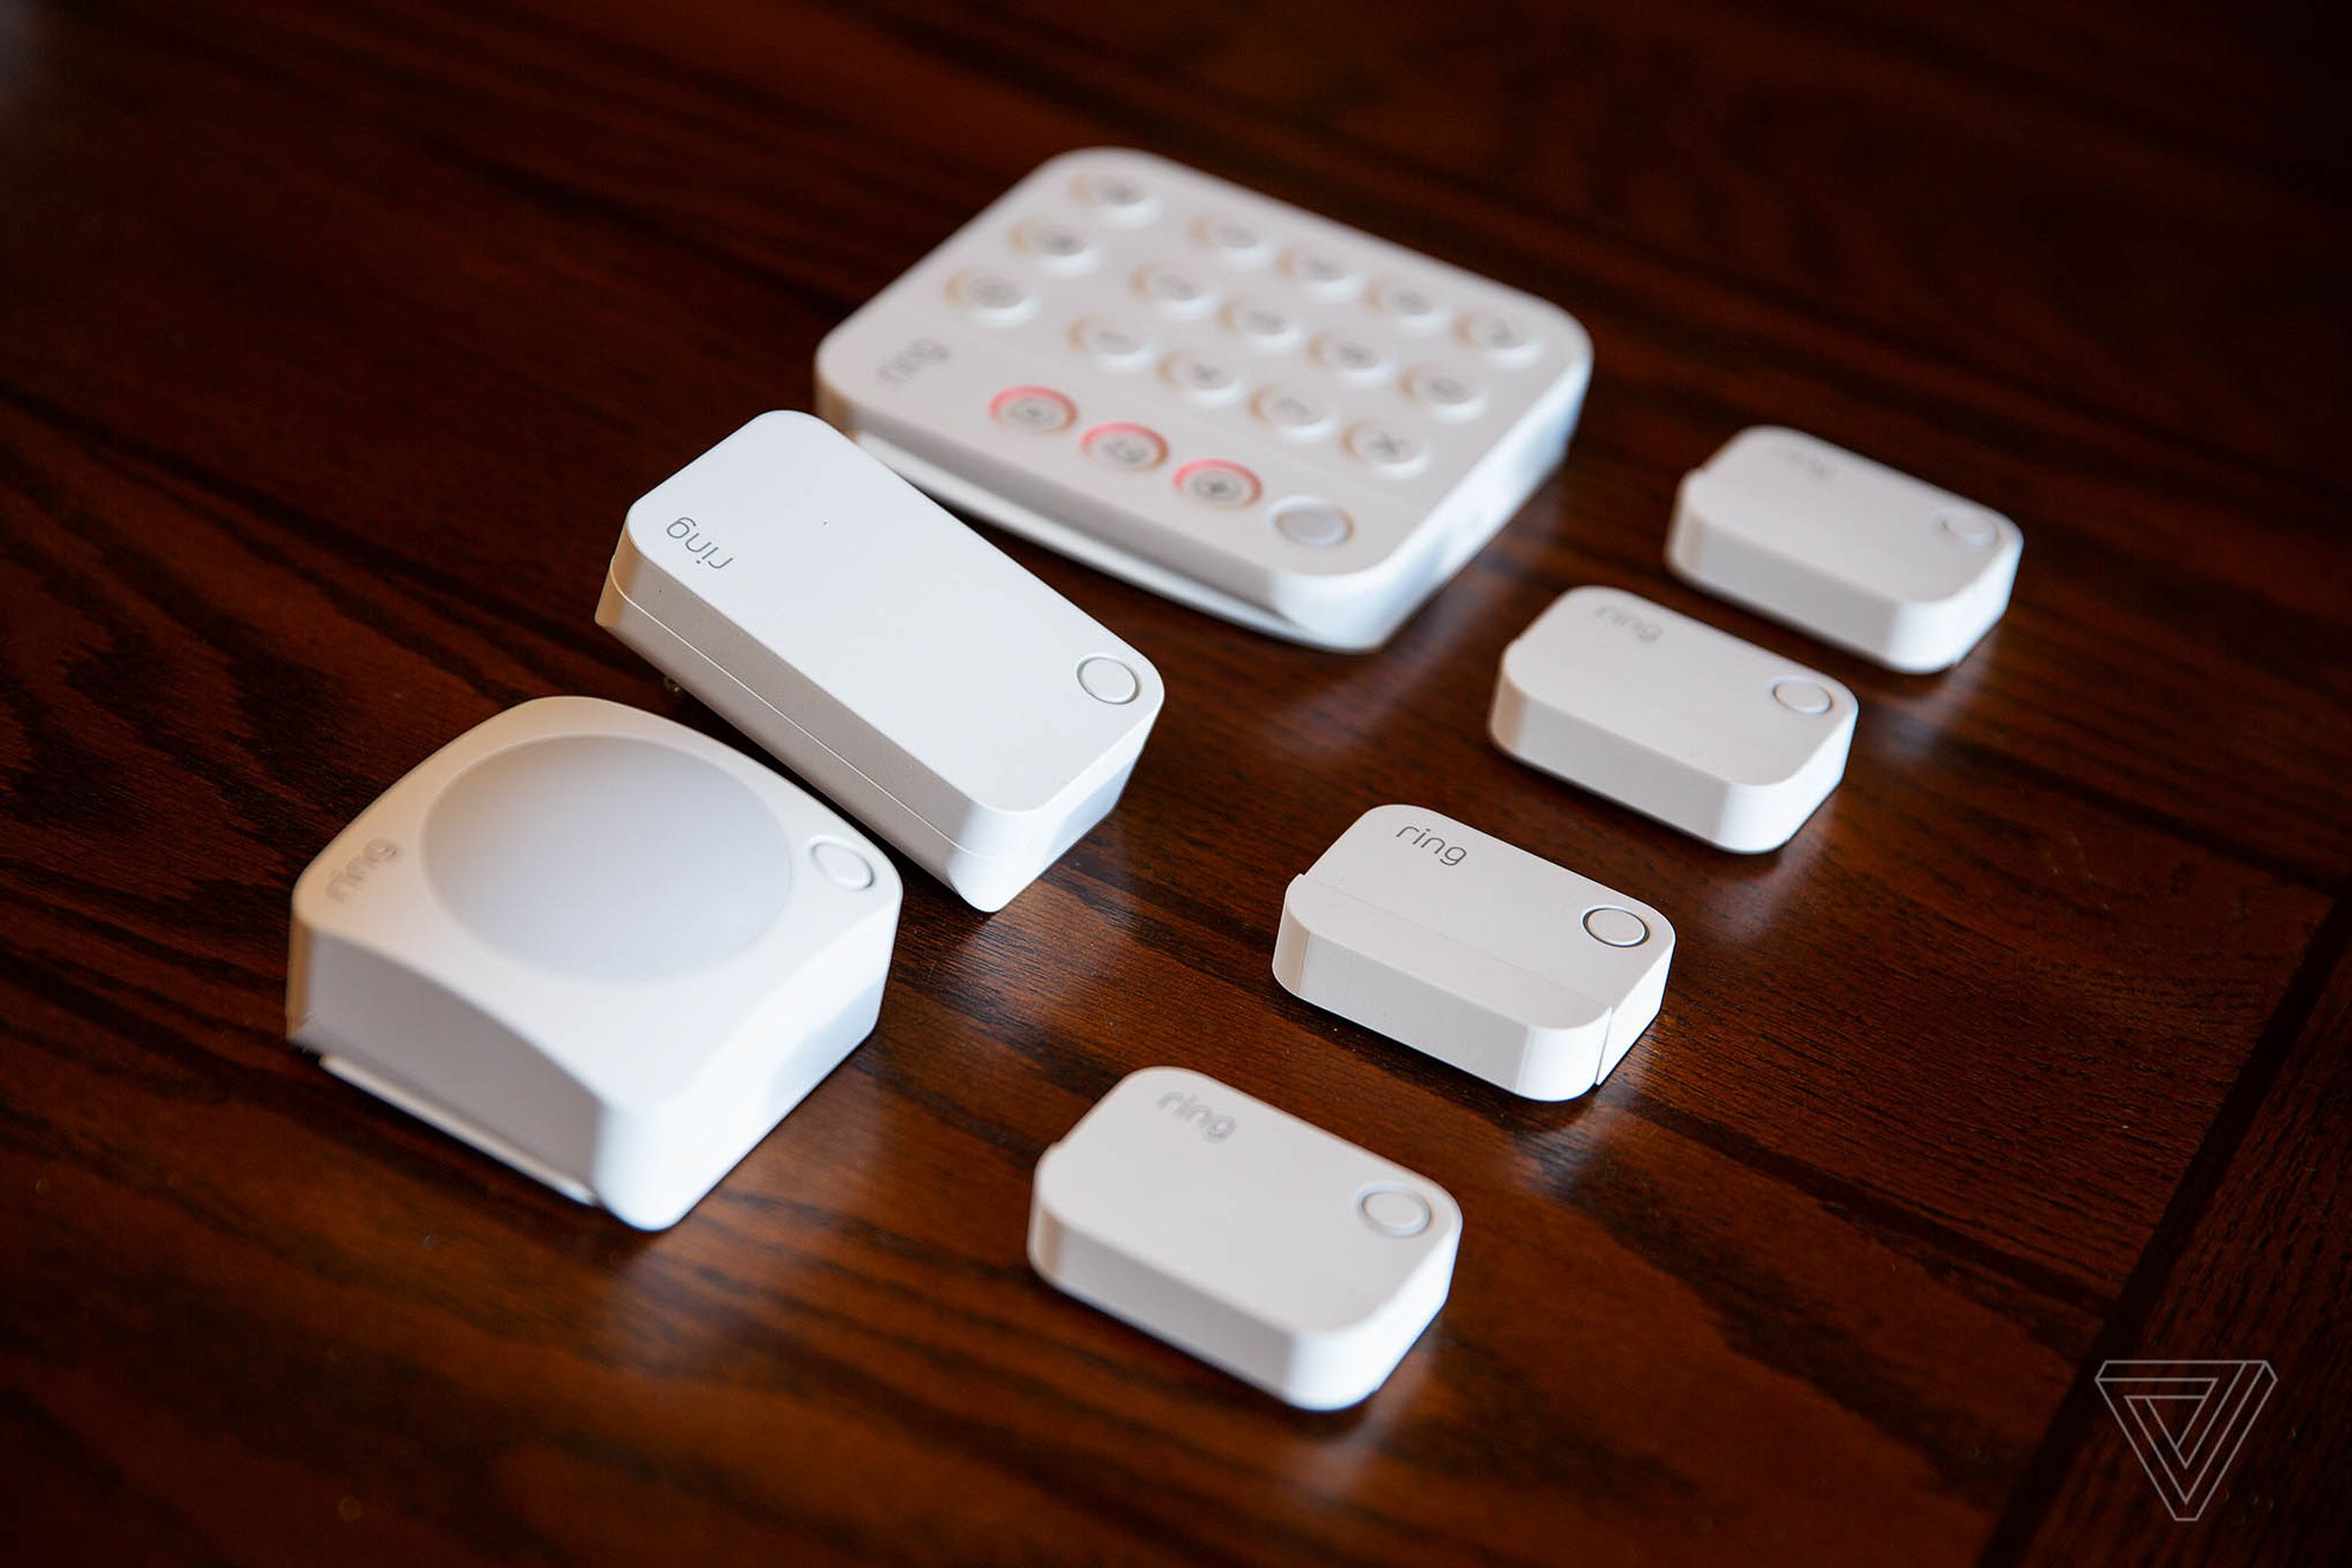 The Ring Alarm Pro eight-piece set comes with the base station (not pictured), four contact sensors, a motion sensor, a Z-Wave range extender and a keypad.